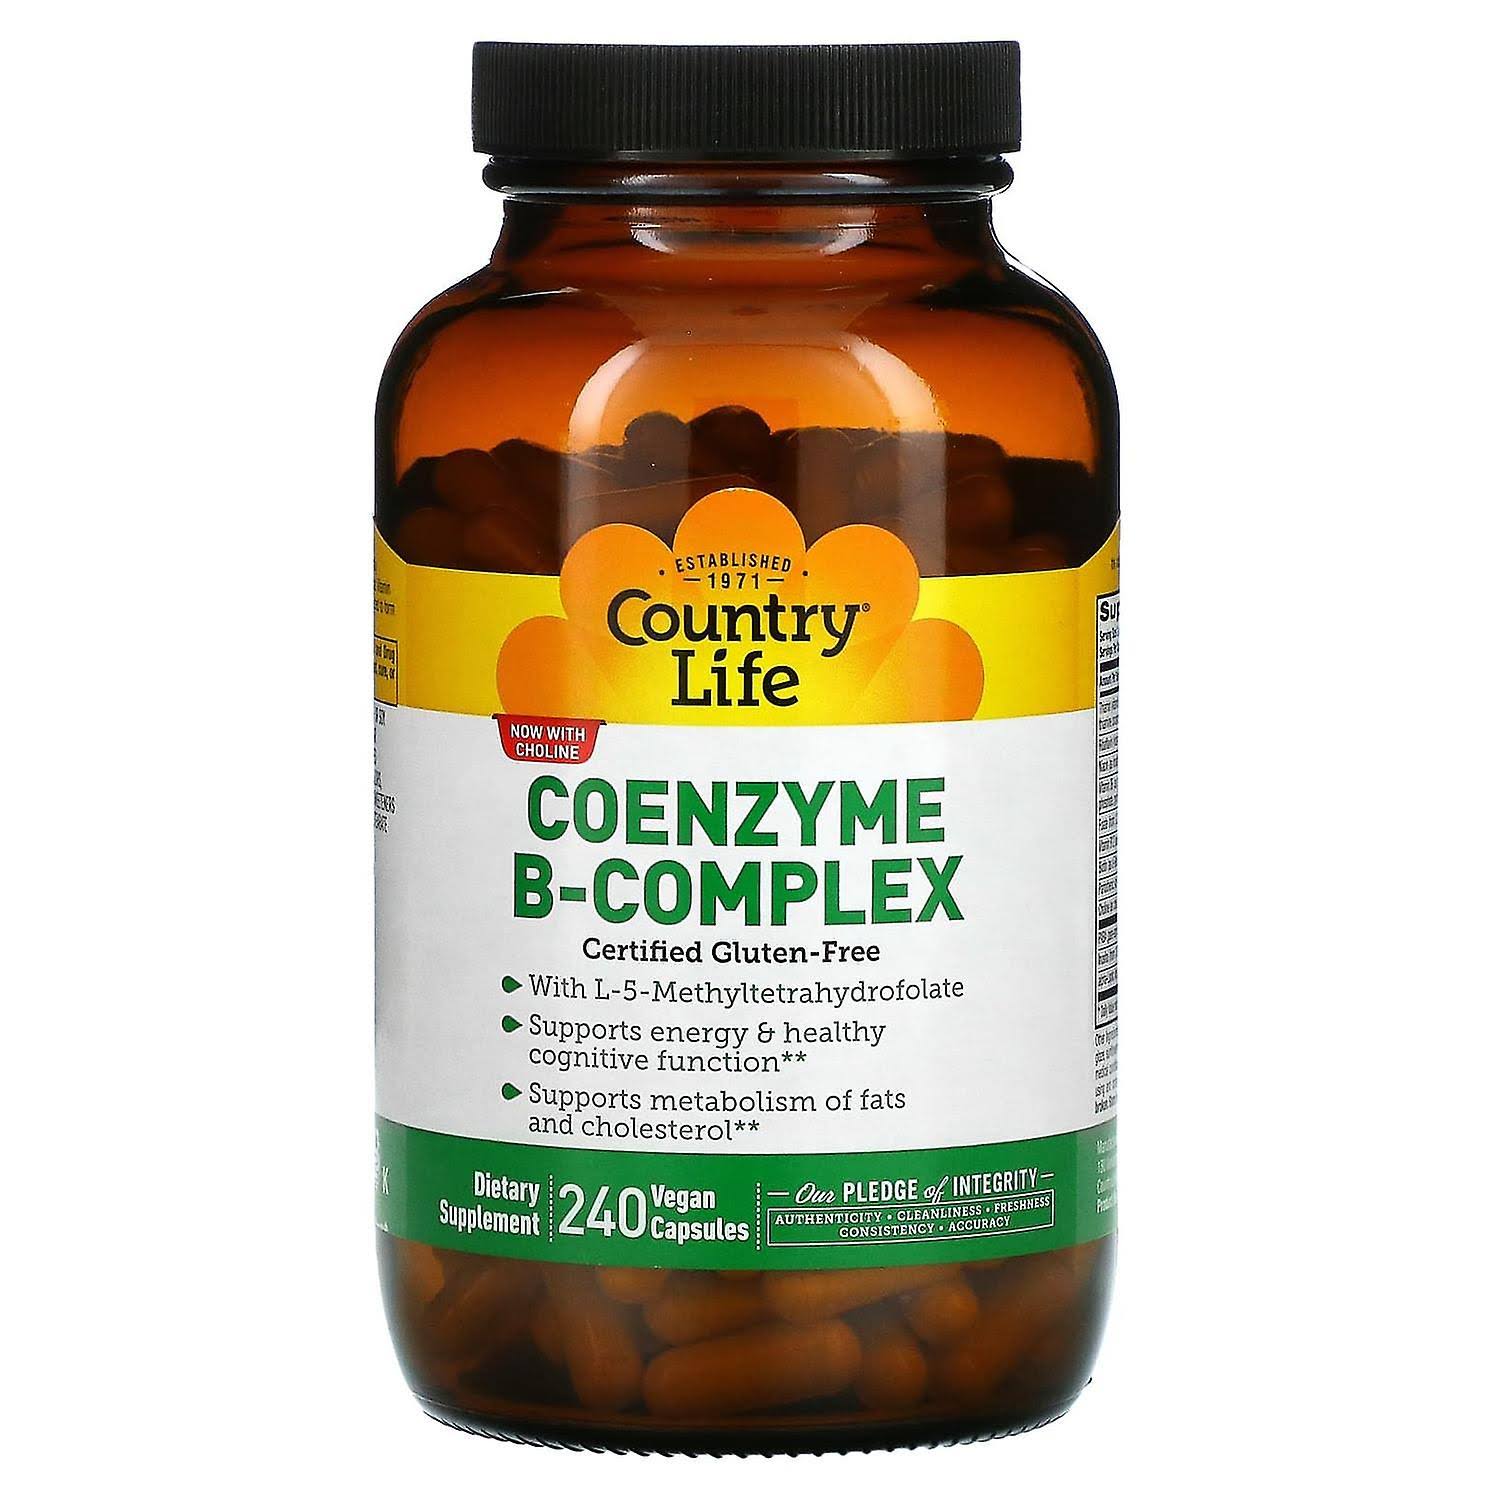 Country Life Coenzyme B-Complex Caps - 240 Vegetarian Capsules